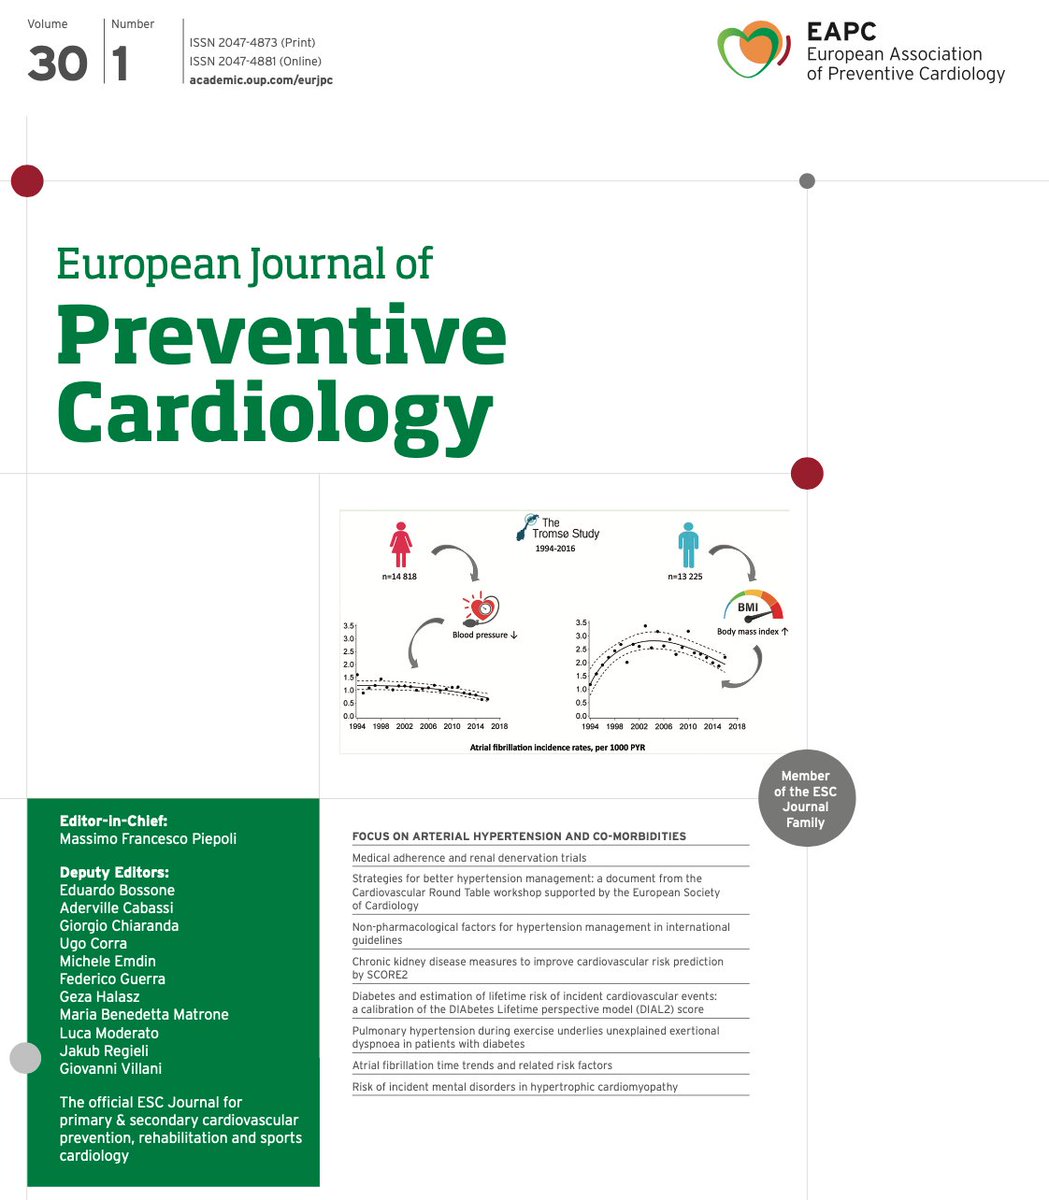 Eur J Prev Cardiol #EJPC Volume 30 Issue 1
Focus on Arterial Hypertension and Co-Morbidities
academic.oup.com/eurjpc/issue/3… @SilCastelletti  @ESC_Journals
@ESCardioNews